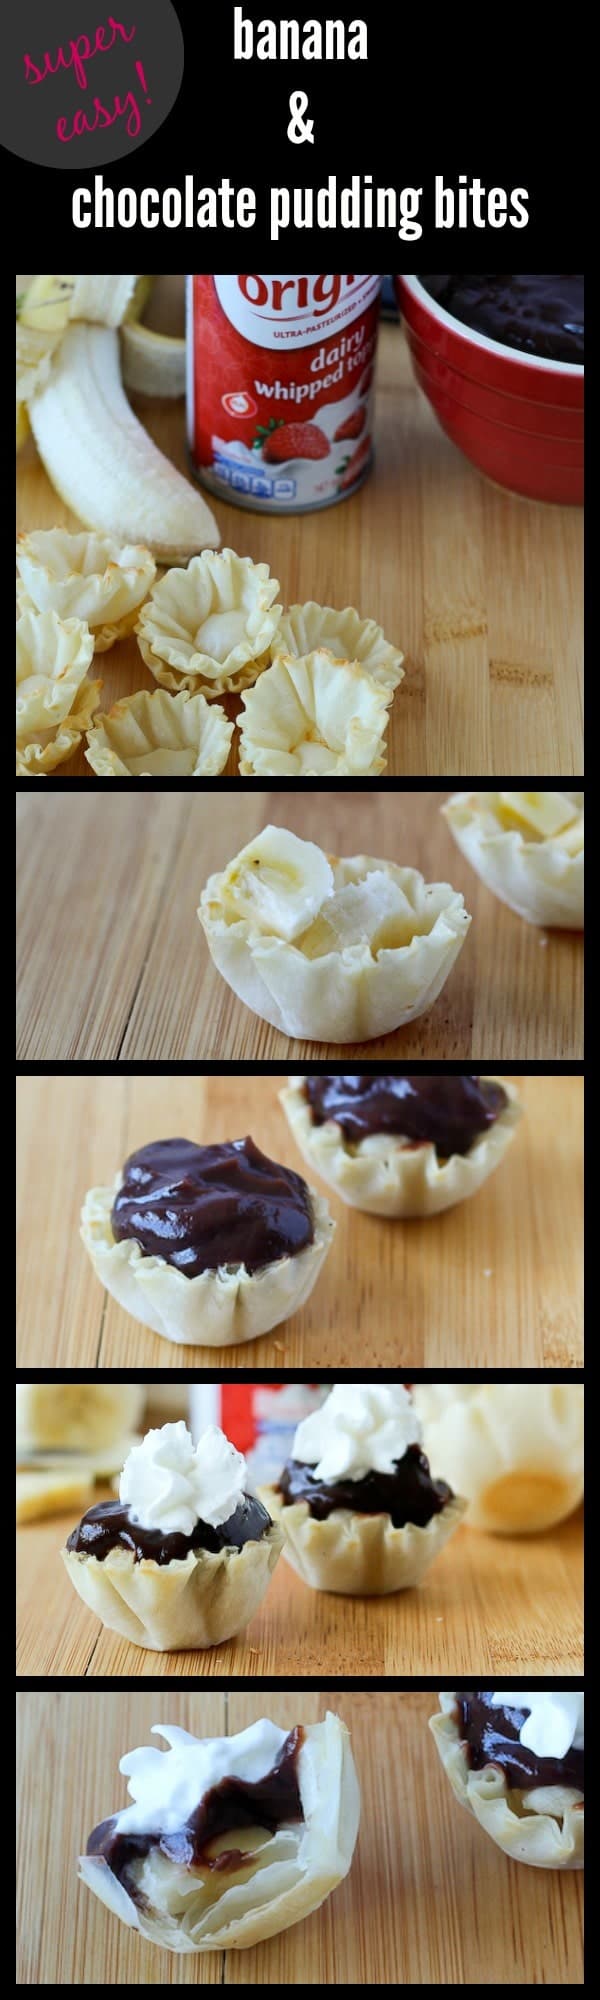 Collage of 5 photos showing dessert bites, with text overlay "Banana & chocolate pudding bites."